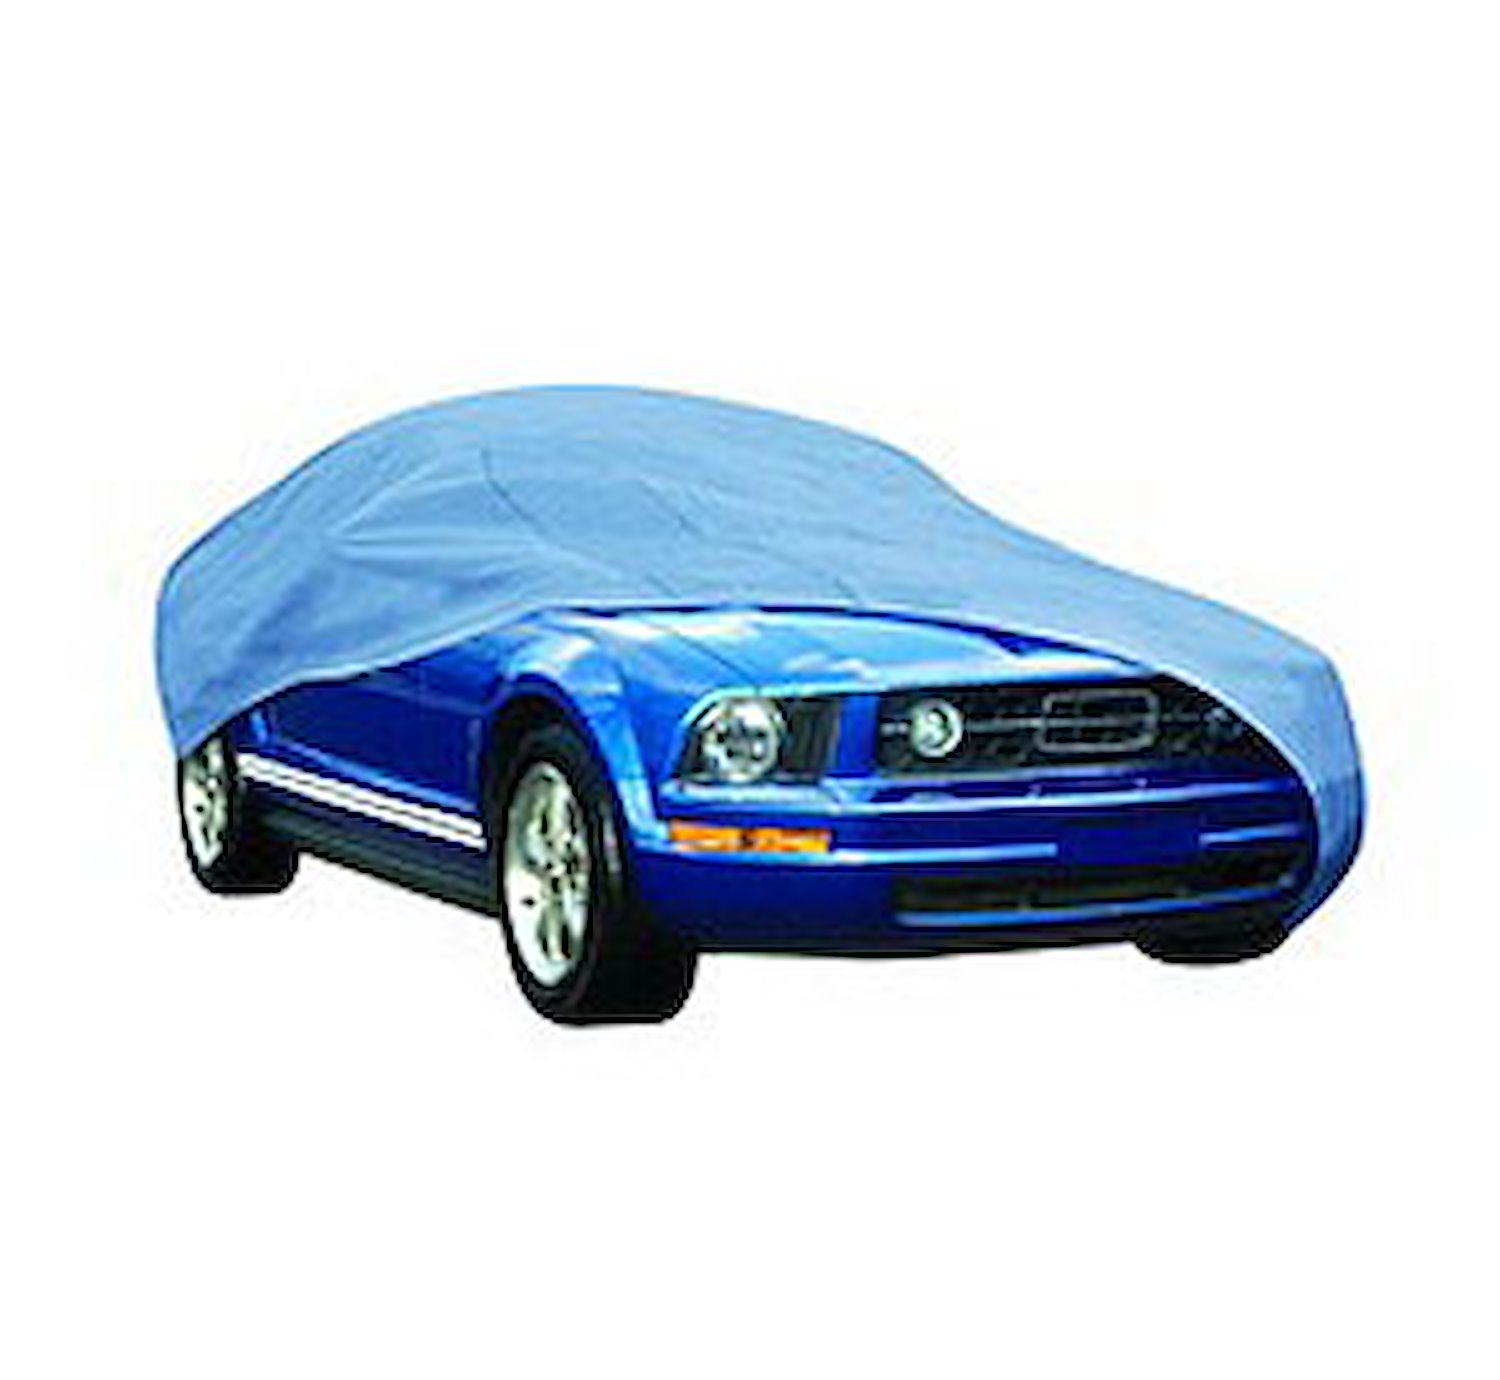 Duro Station Wagon Cover Fits Up To 18" In Length